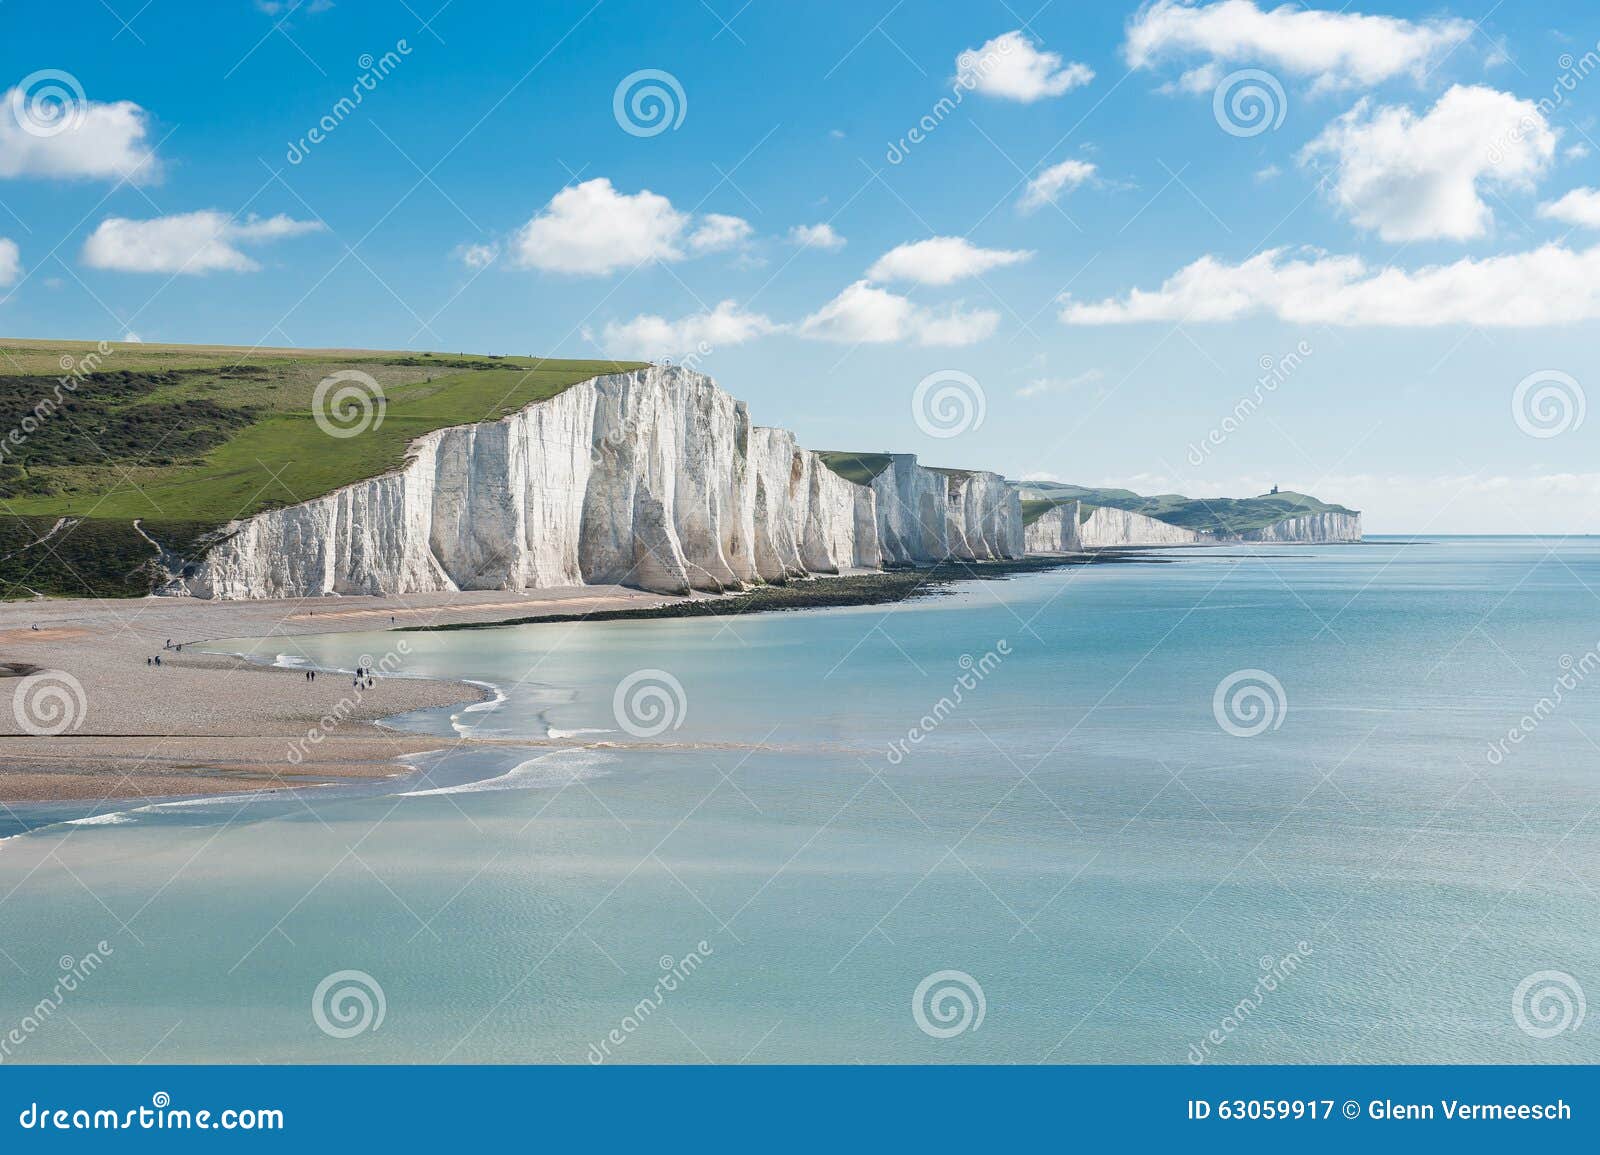 Seven Sisters National Park, England Stock Image - Image of open ...